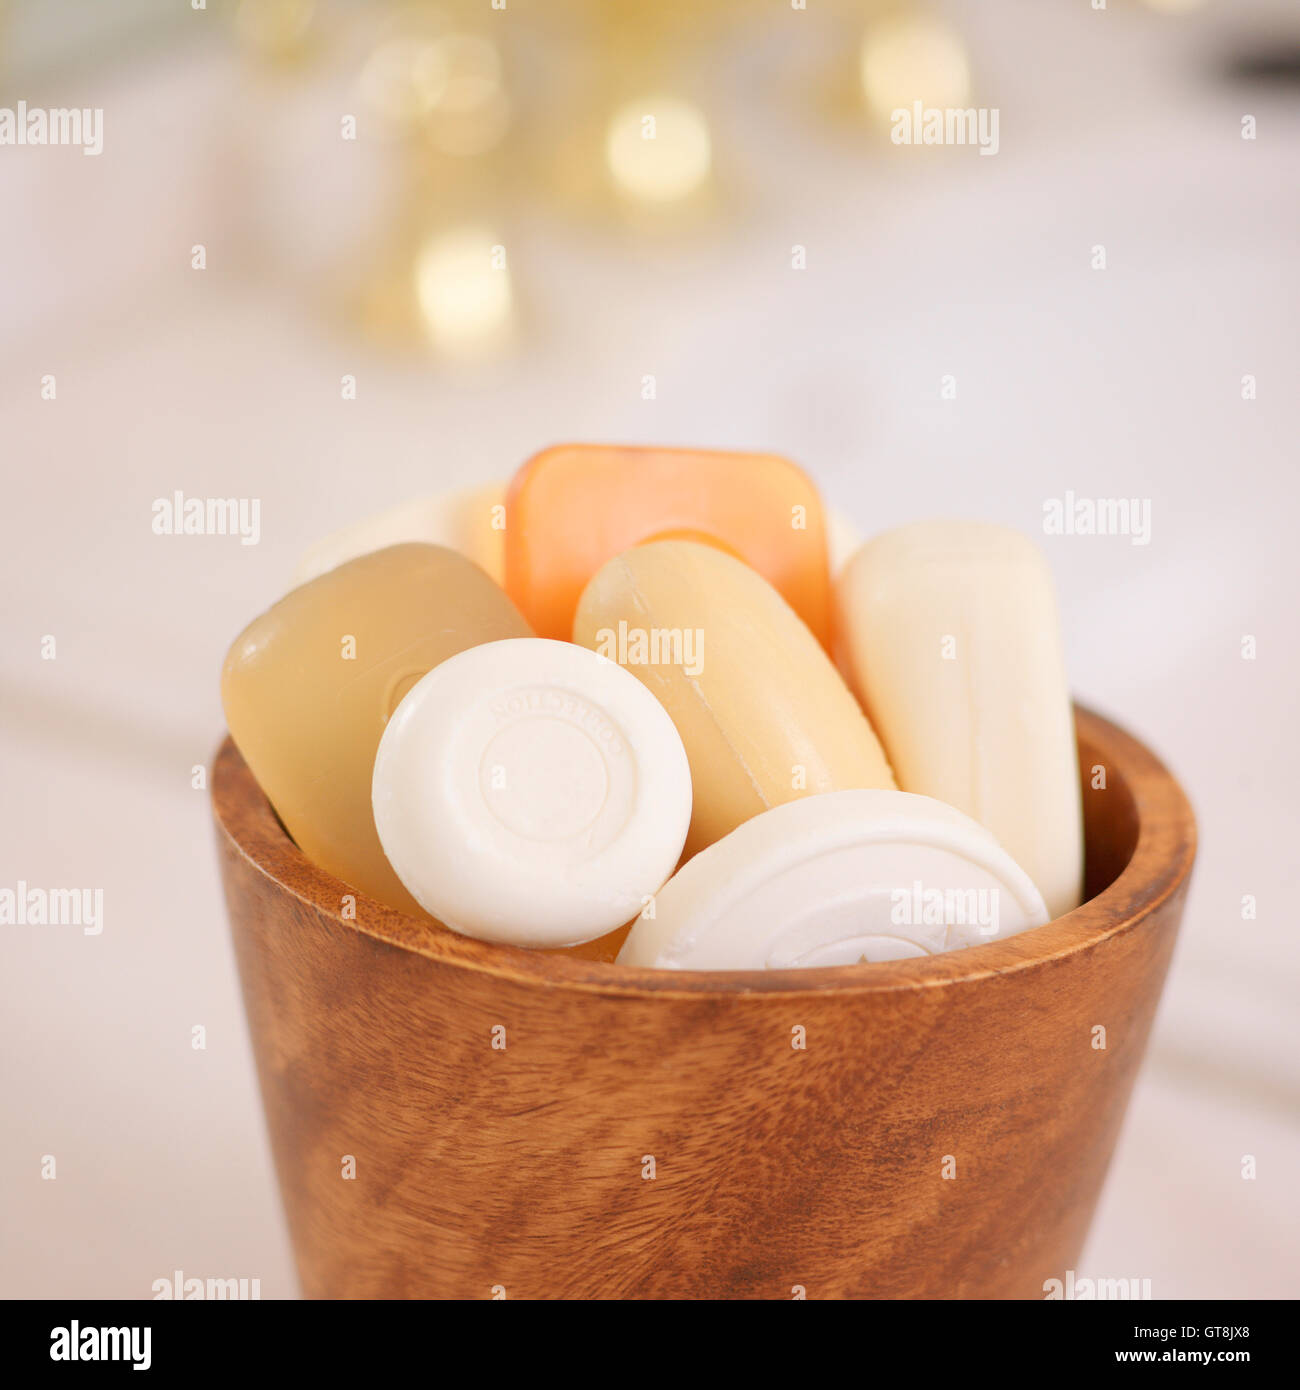 Variety of Bars of Soap in Wooden Bowl with Gold Sink Faucet in the Background Stock Photo